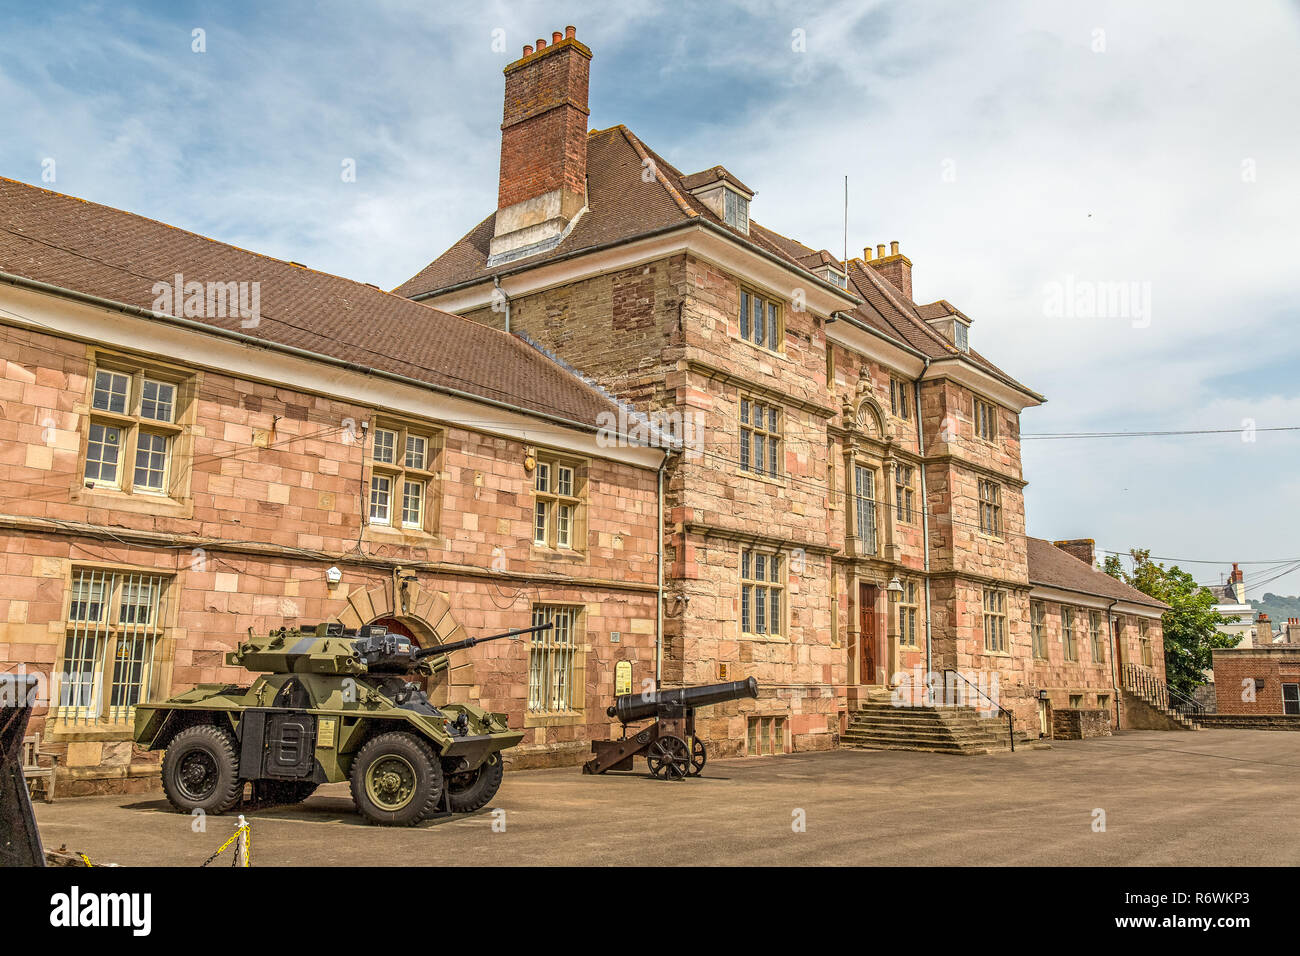 Monmouth Regimental Museum, located on Castle Hill in Monmouth, Wales. Stock Photo